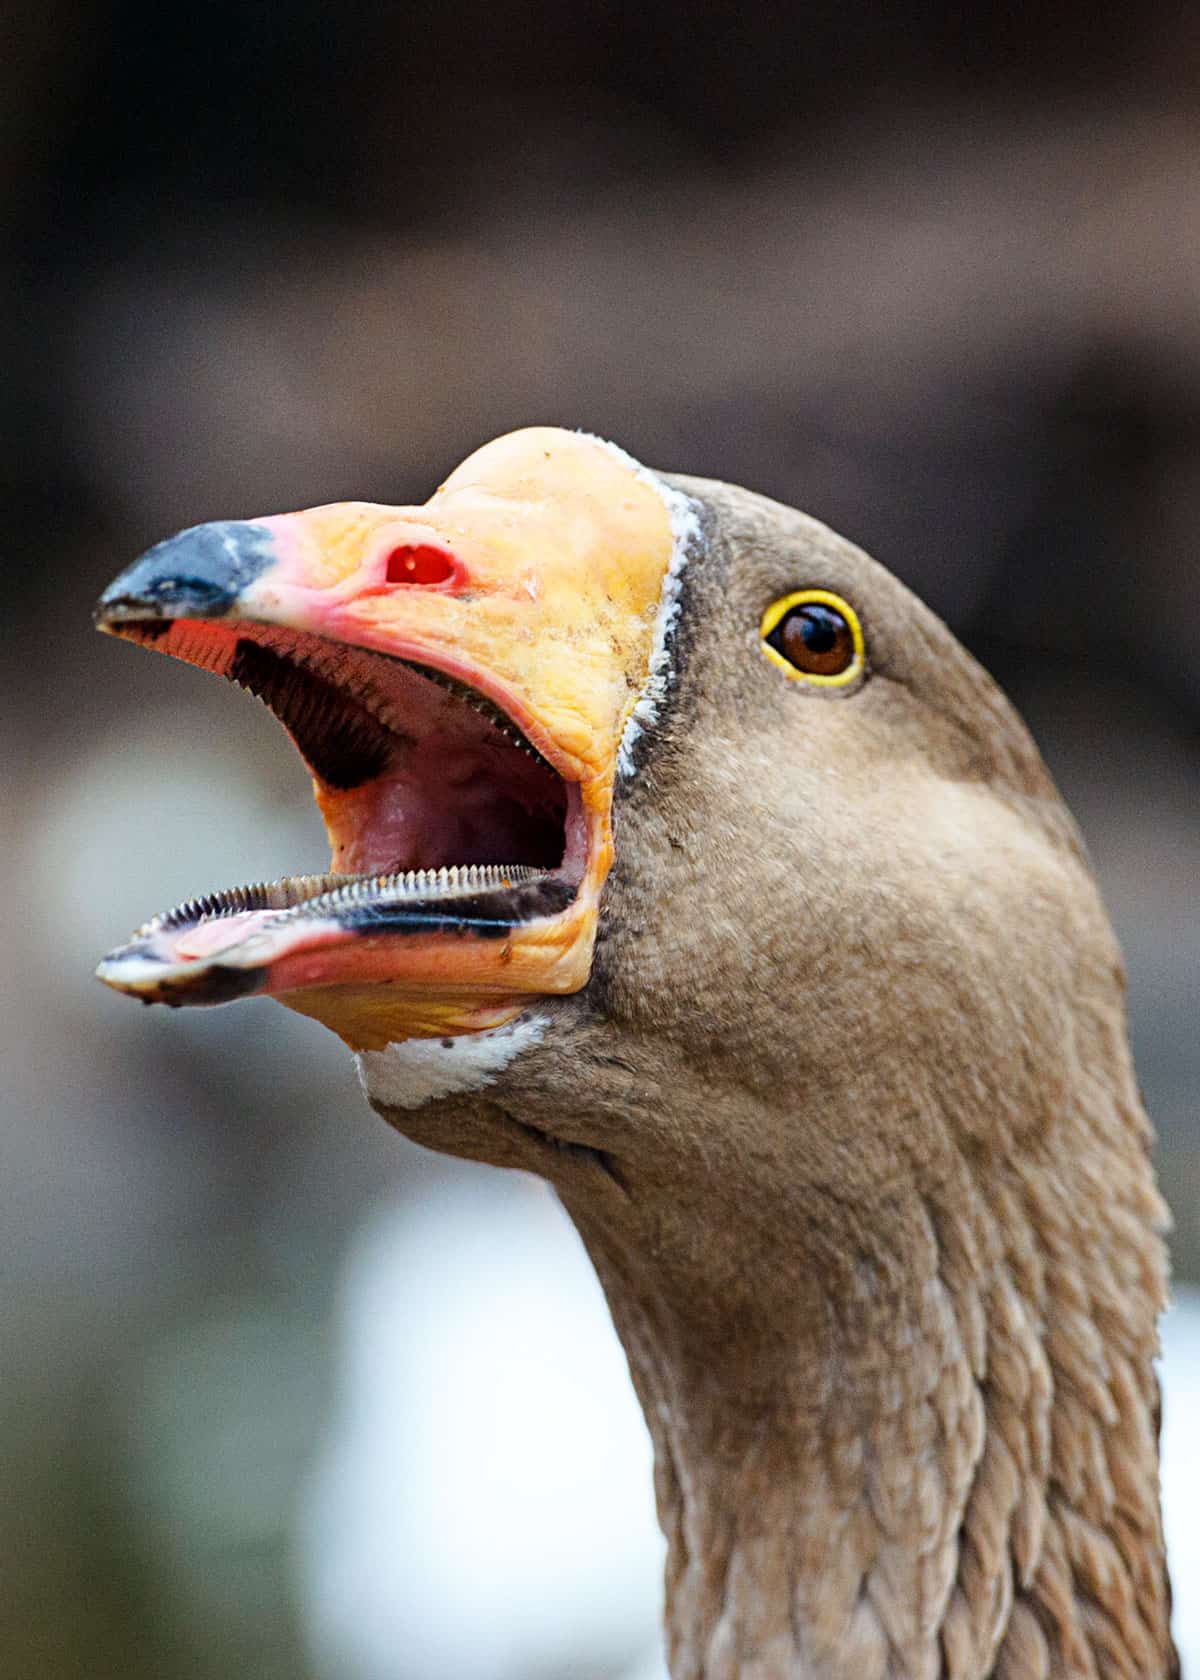 Do geese bite people?